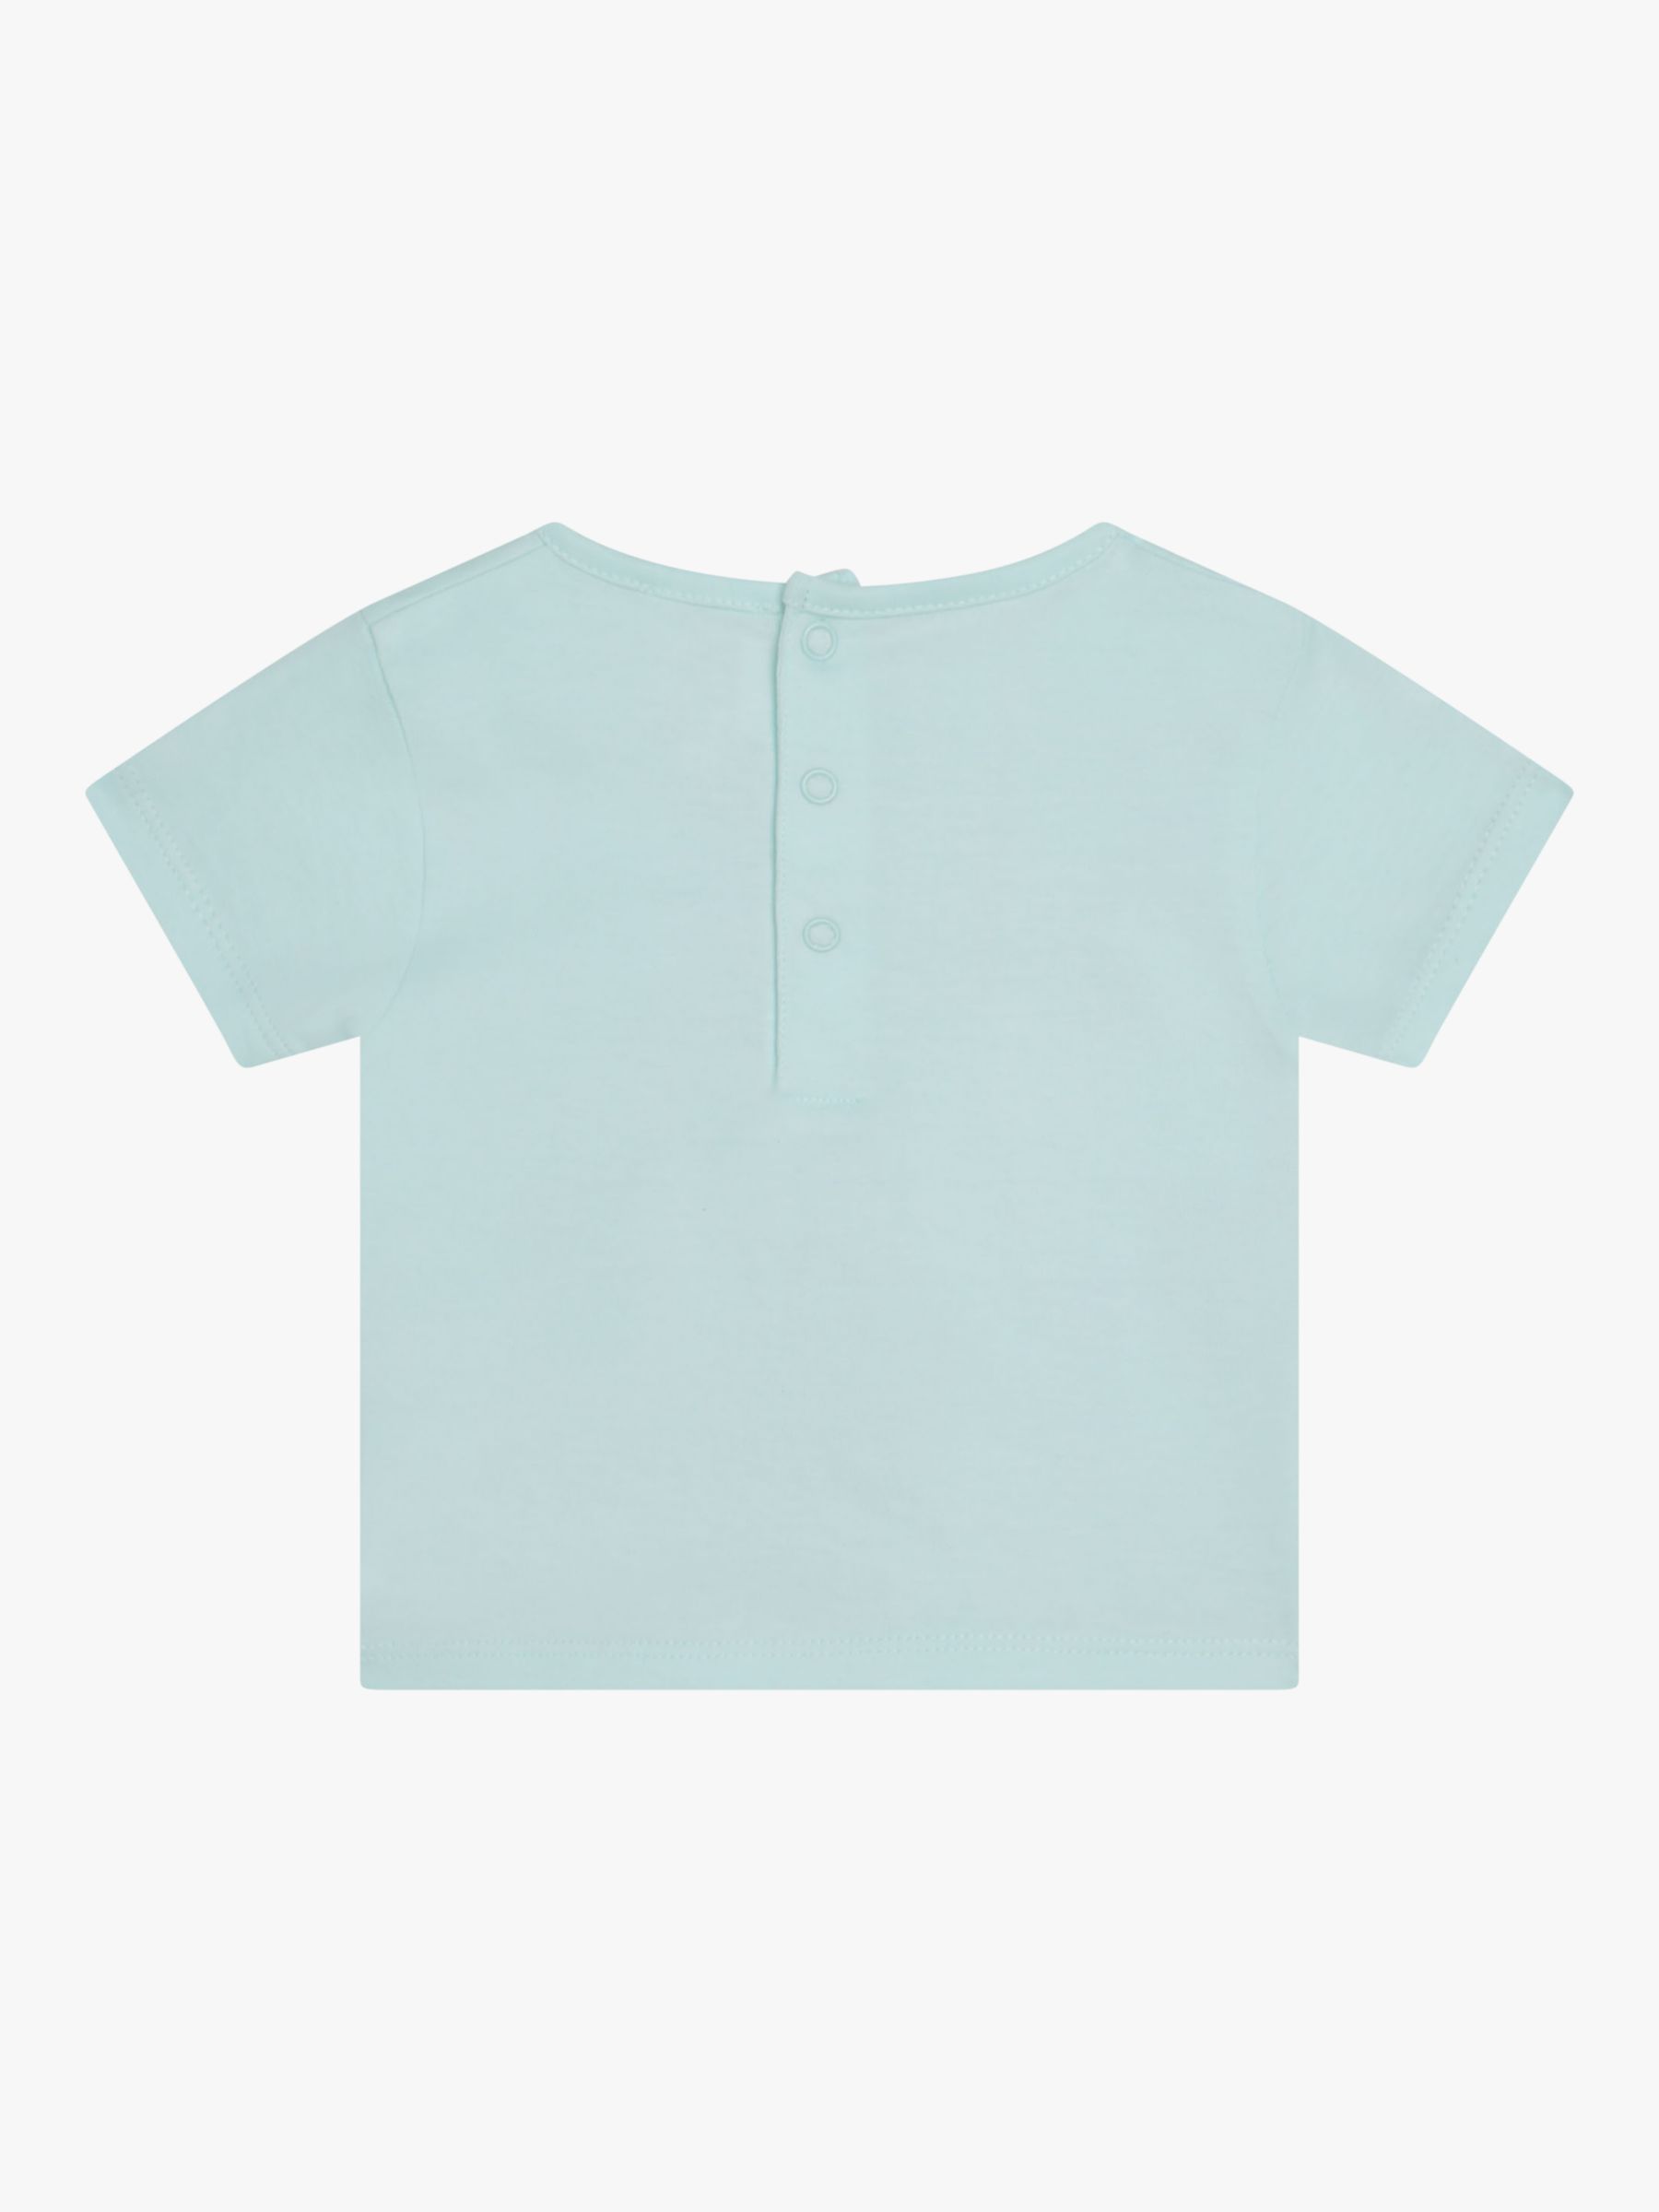 Carrément Beau Baby Short Sleeve T-Shirt, Green Turquoise, 4 years